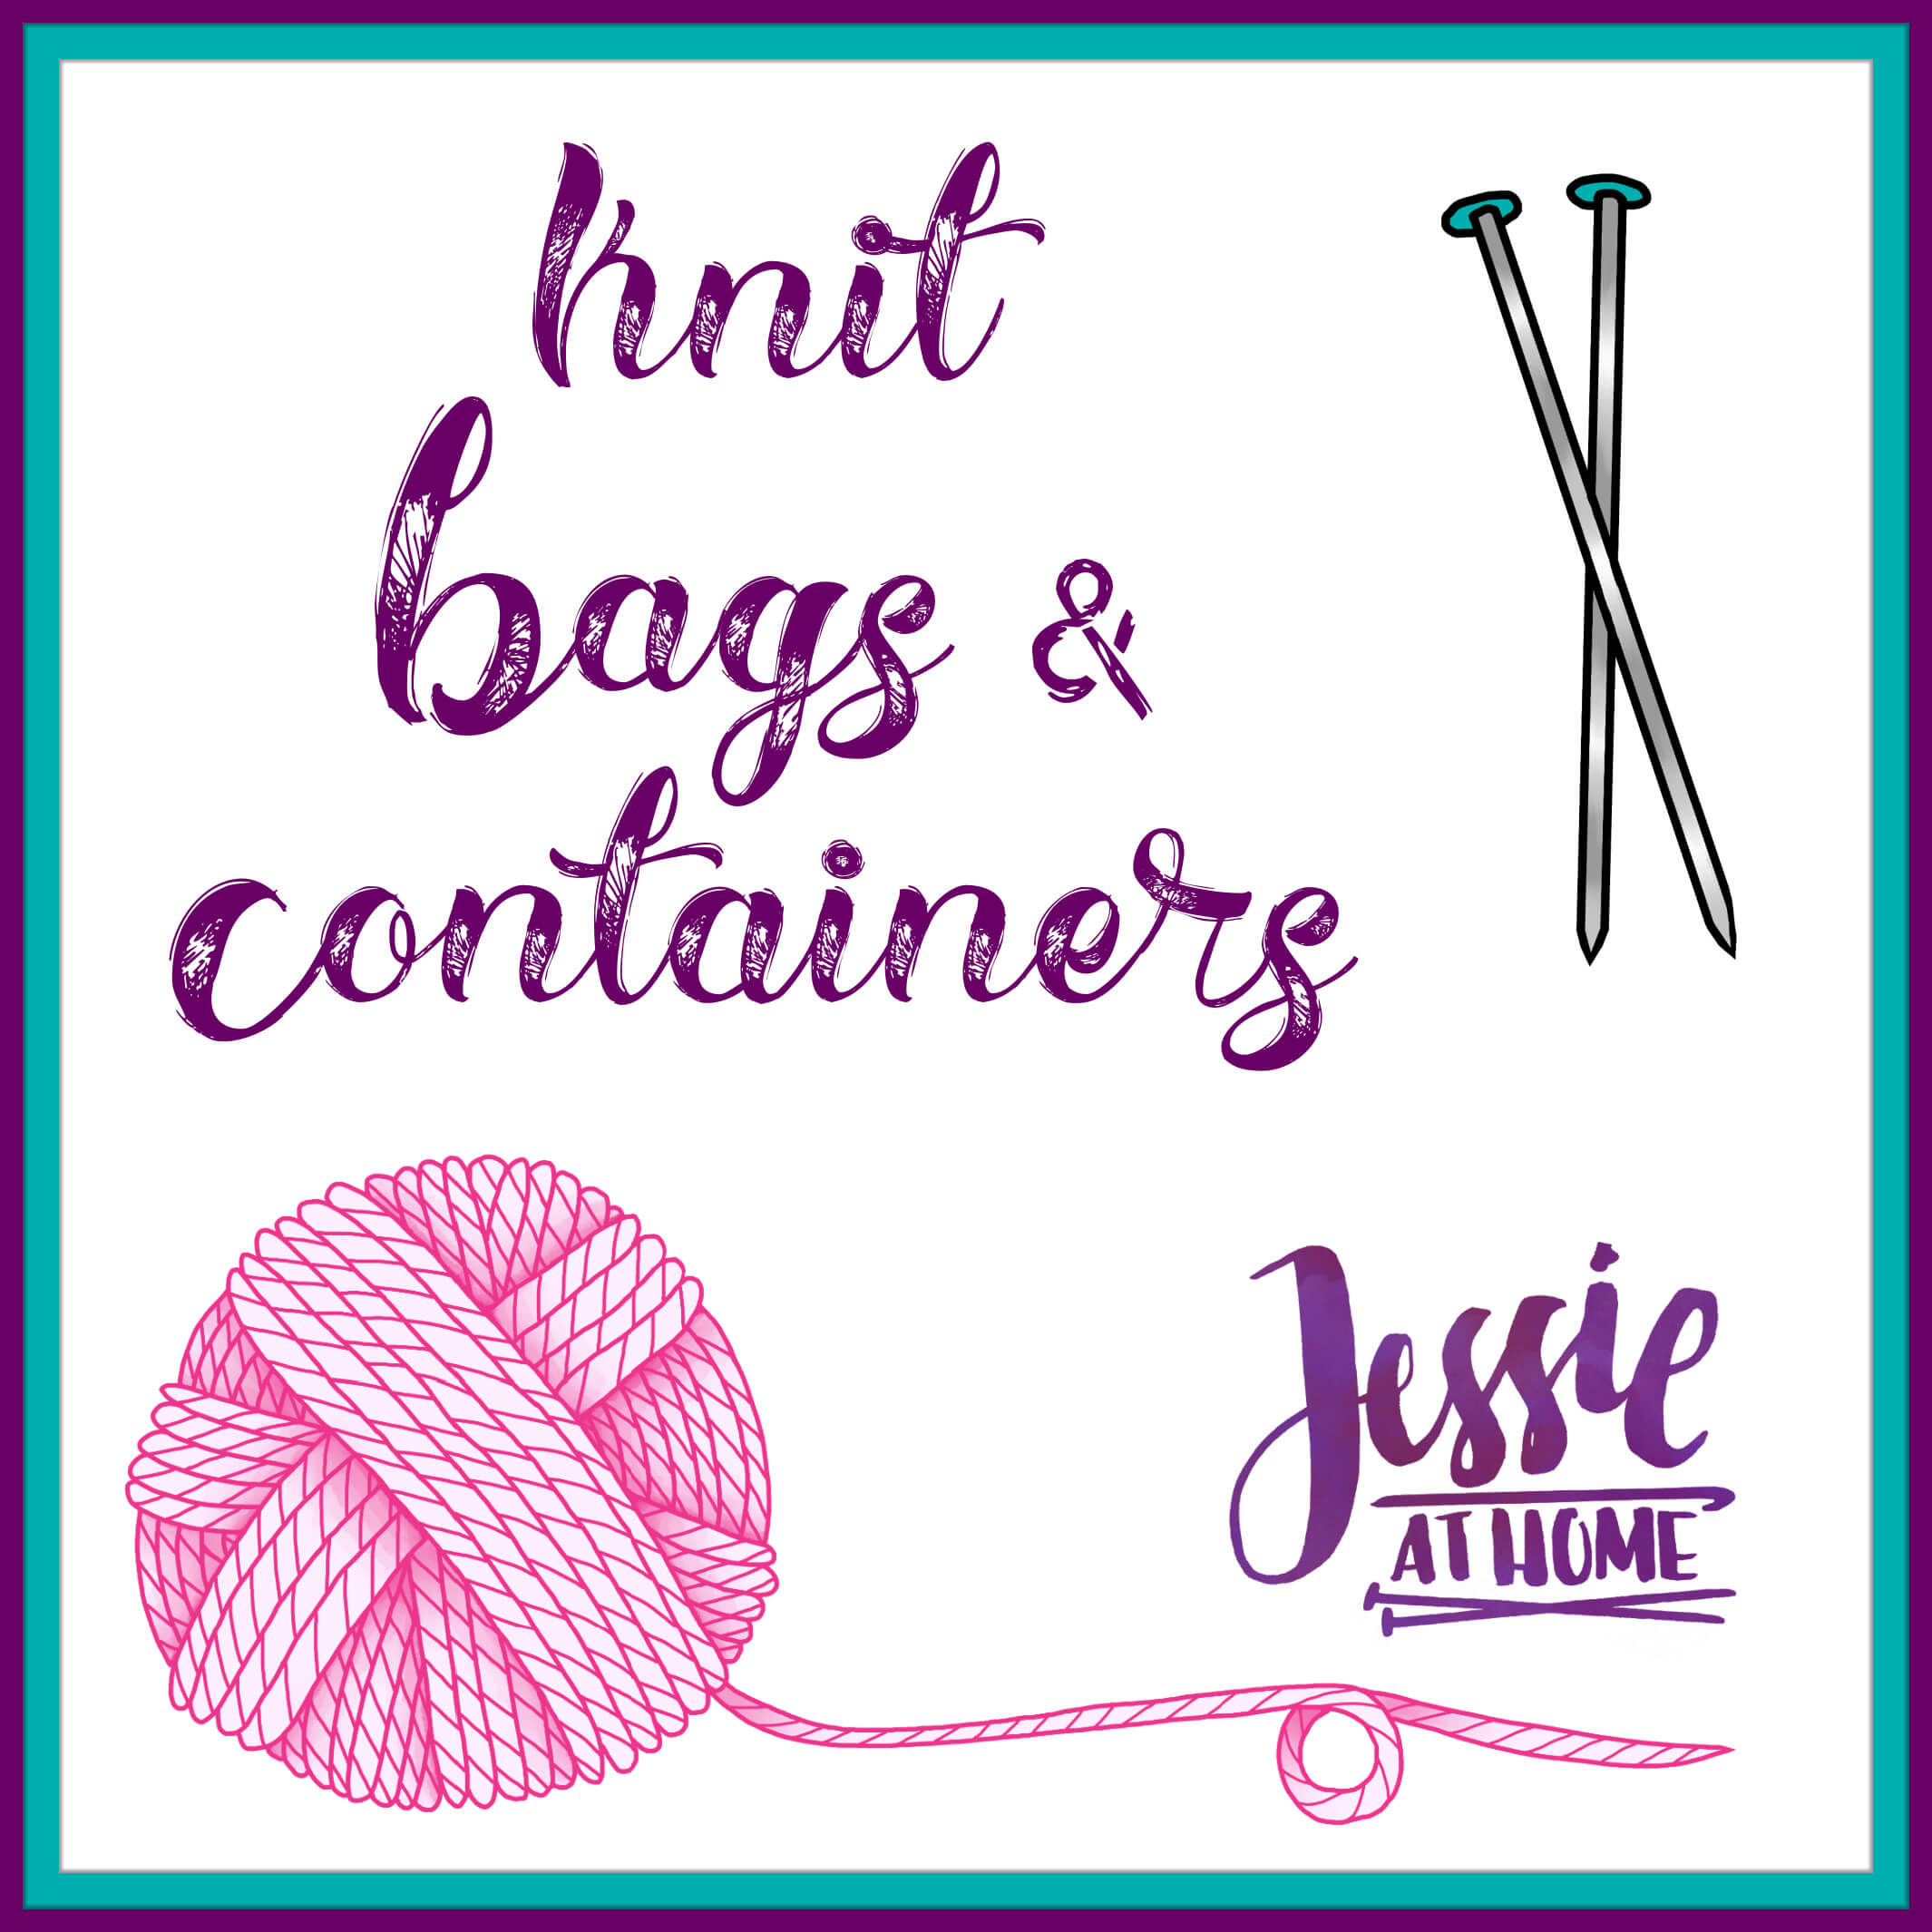 Knit Bags & Containers Menu on Jessie At Home